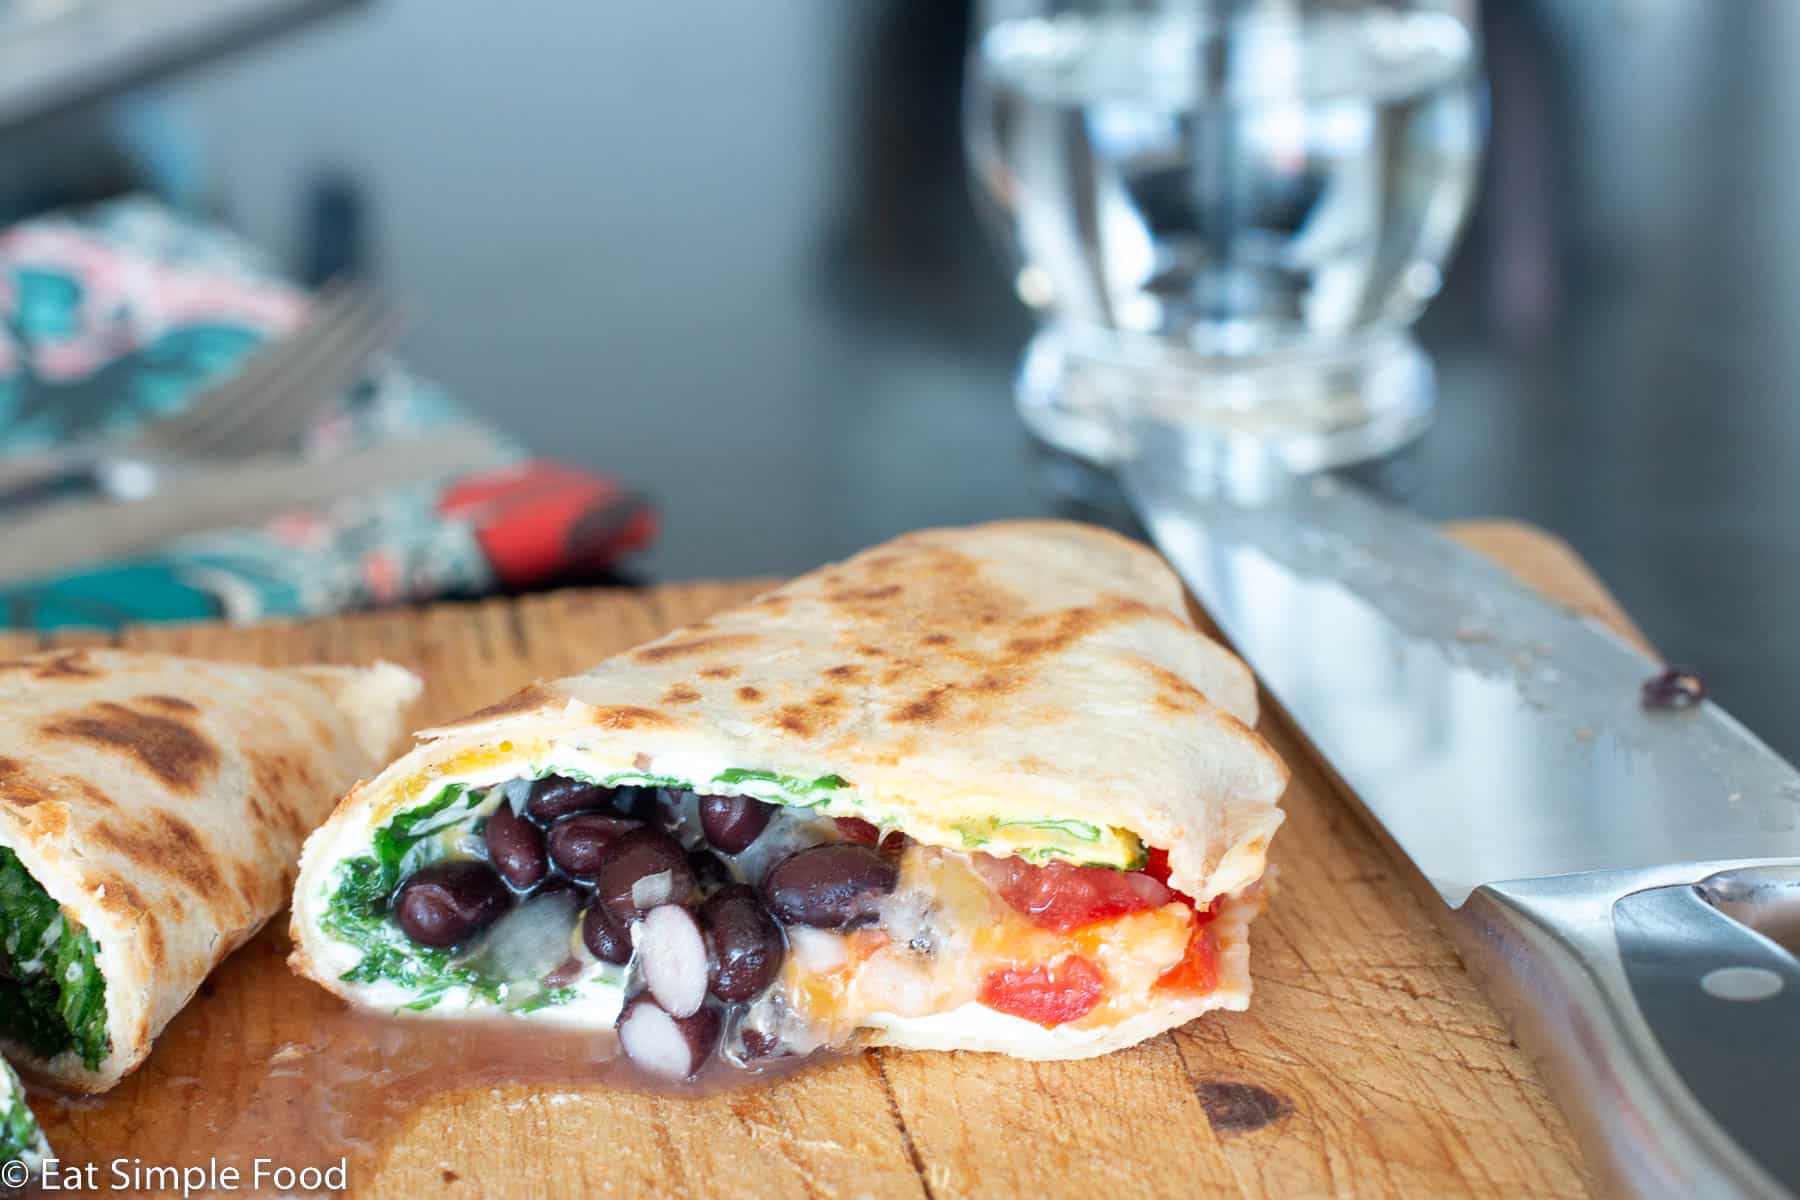 Browned flour tortilla quesadilla cut in half with filling showing on a wood cutting board with a chef's knife. Ingredients are black beans, arugula, cheese, and tomatoes.